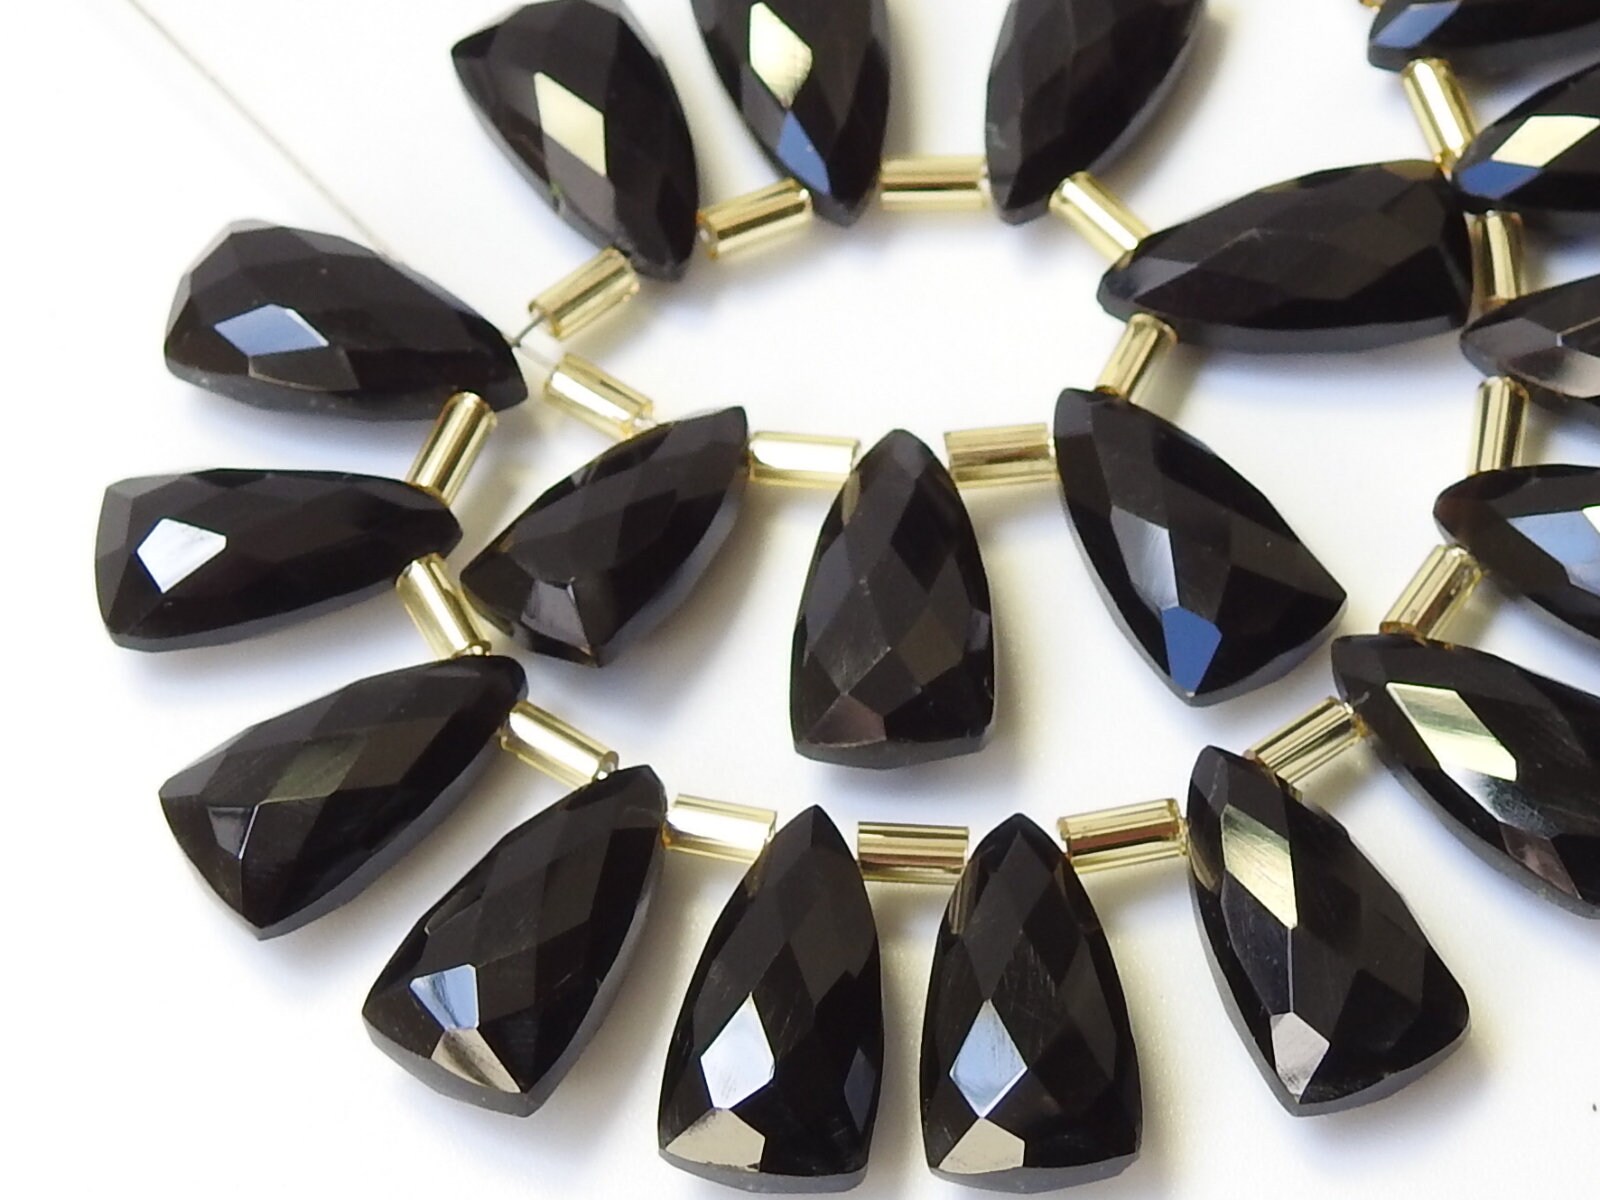 Black Onyx Long Triangle,Trillion,Pyramid,Teardrop,Drop,Briolettes,Faceted,Earrings Pair,Wholesale Price,New Arrival 15X8MM Approx PME-CY2 | Save 33% - Rajasthan Living 11